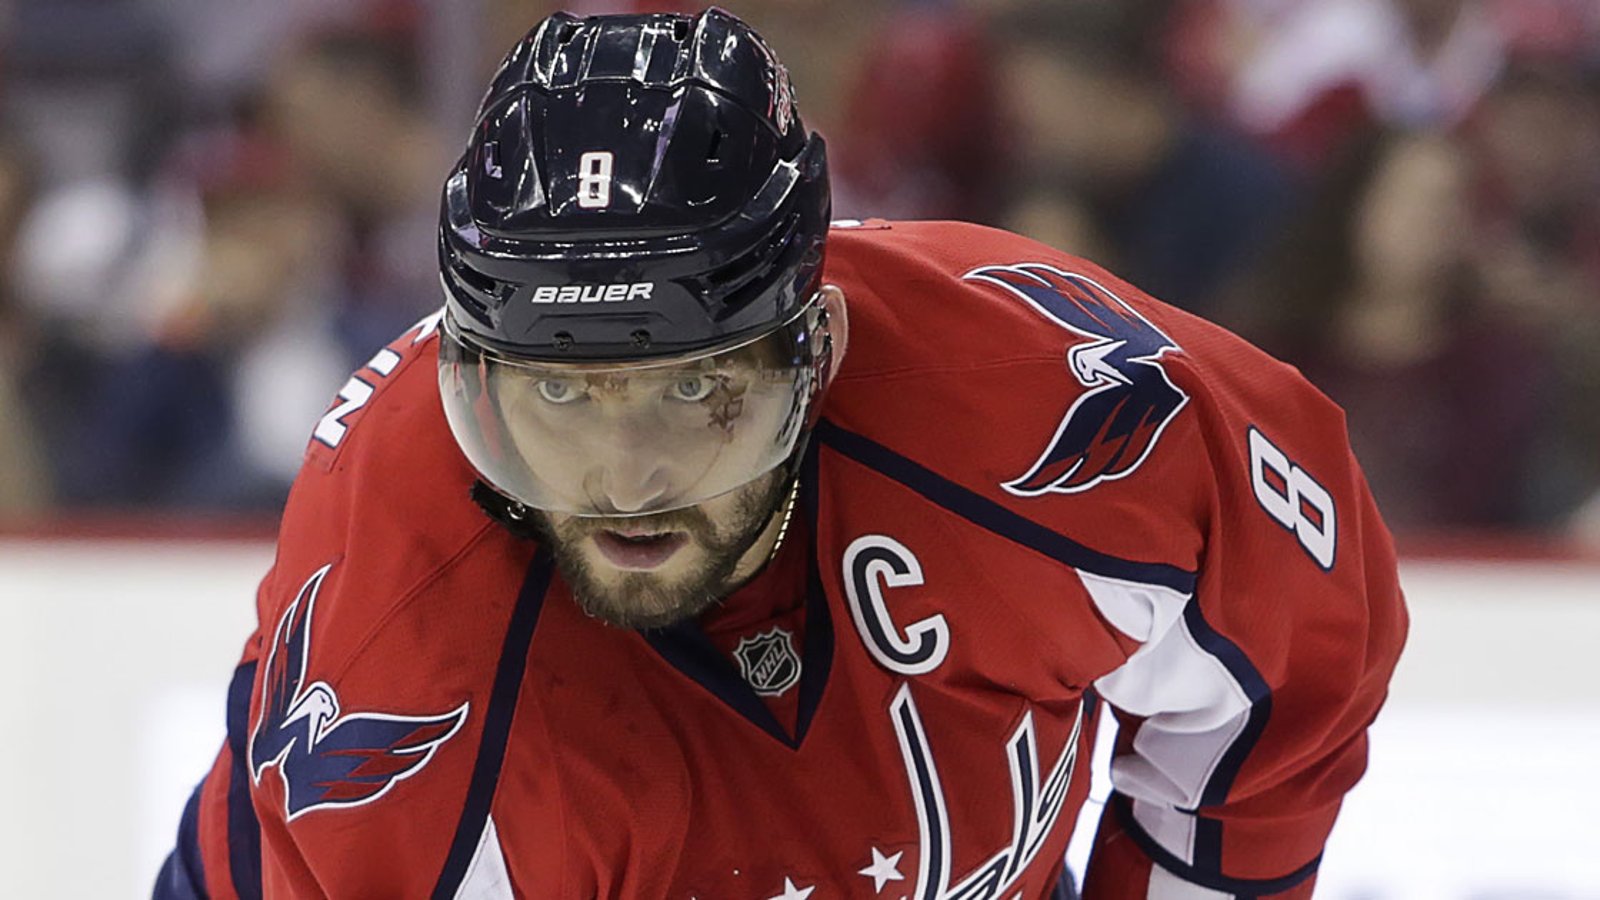 Ovechkin's teammates are playing a guessing game